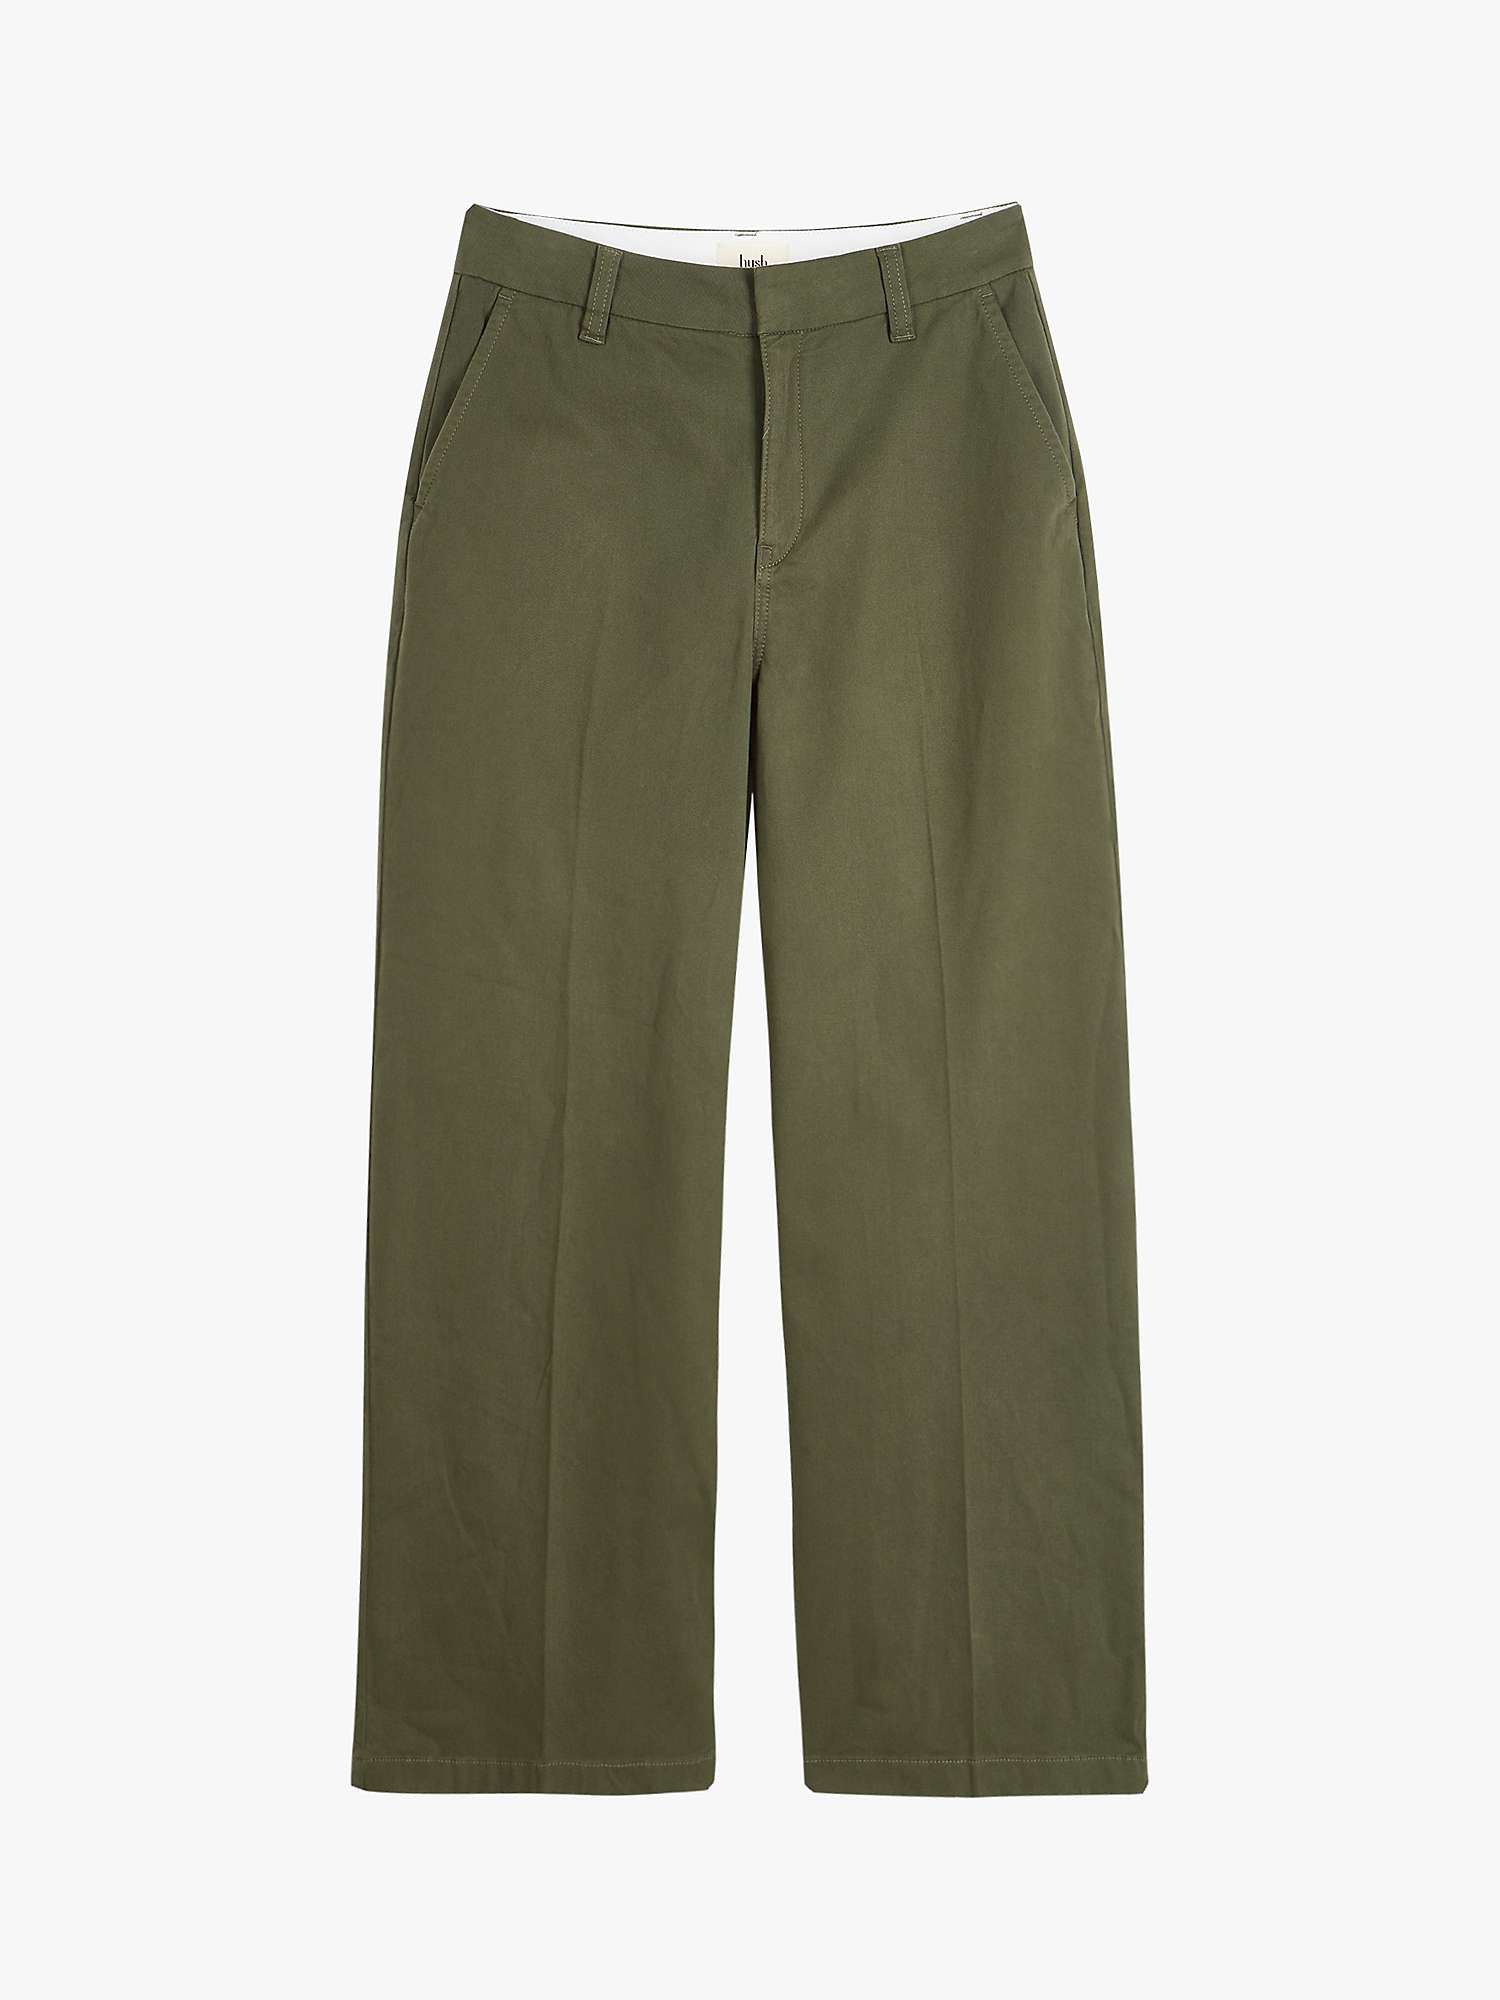 Buy HUSH Camile Flat Front Cotton Trousers Online at johnlewis.com